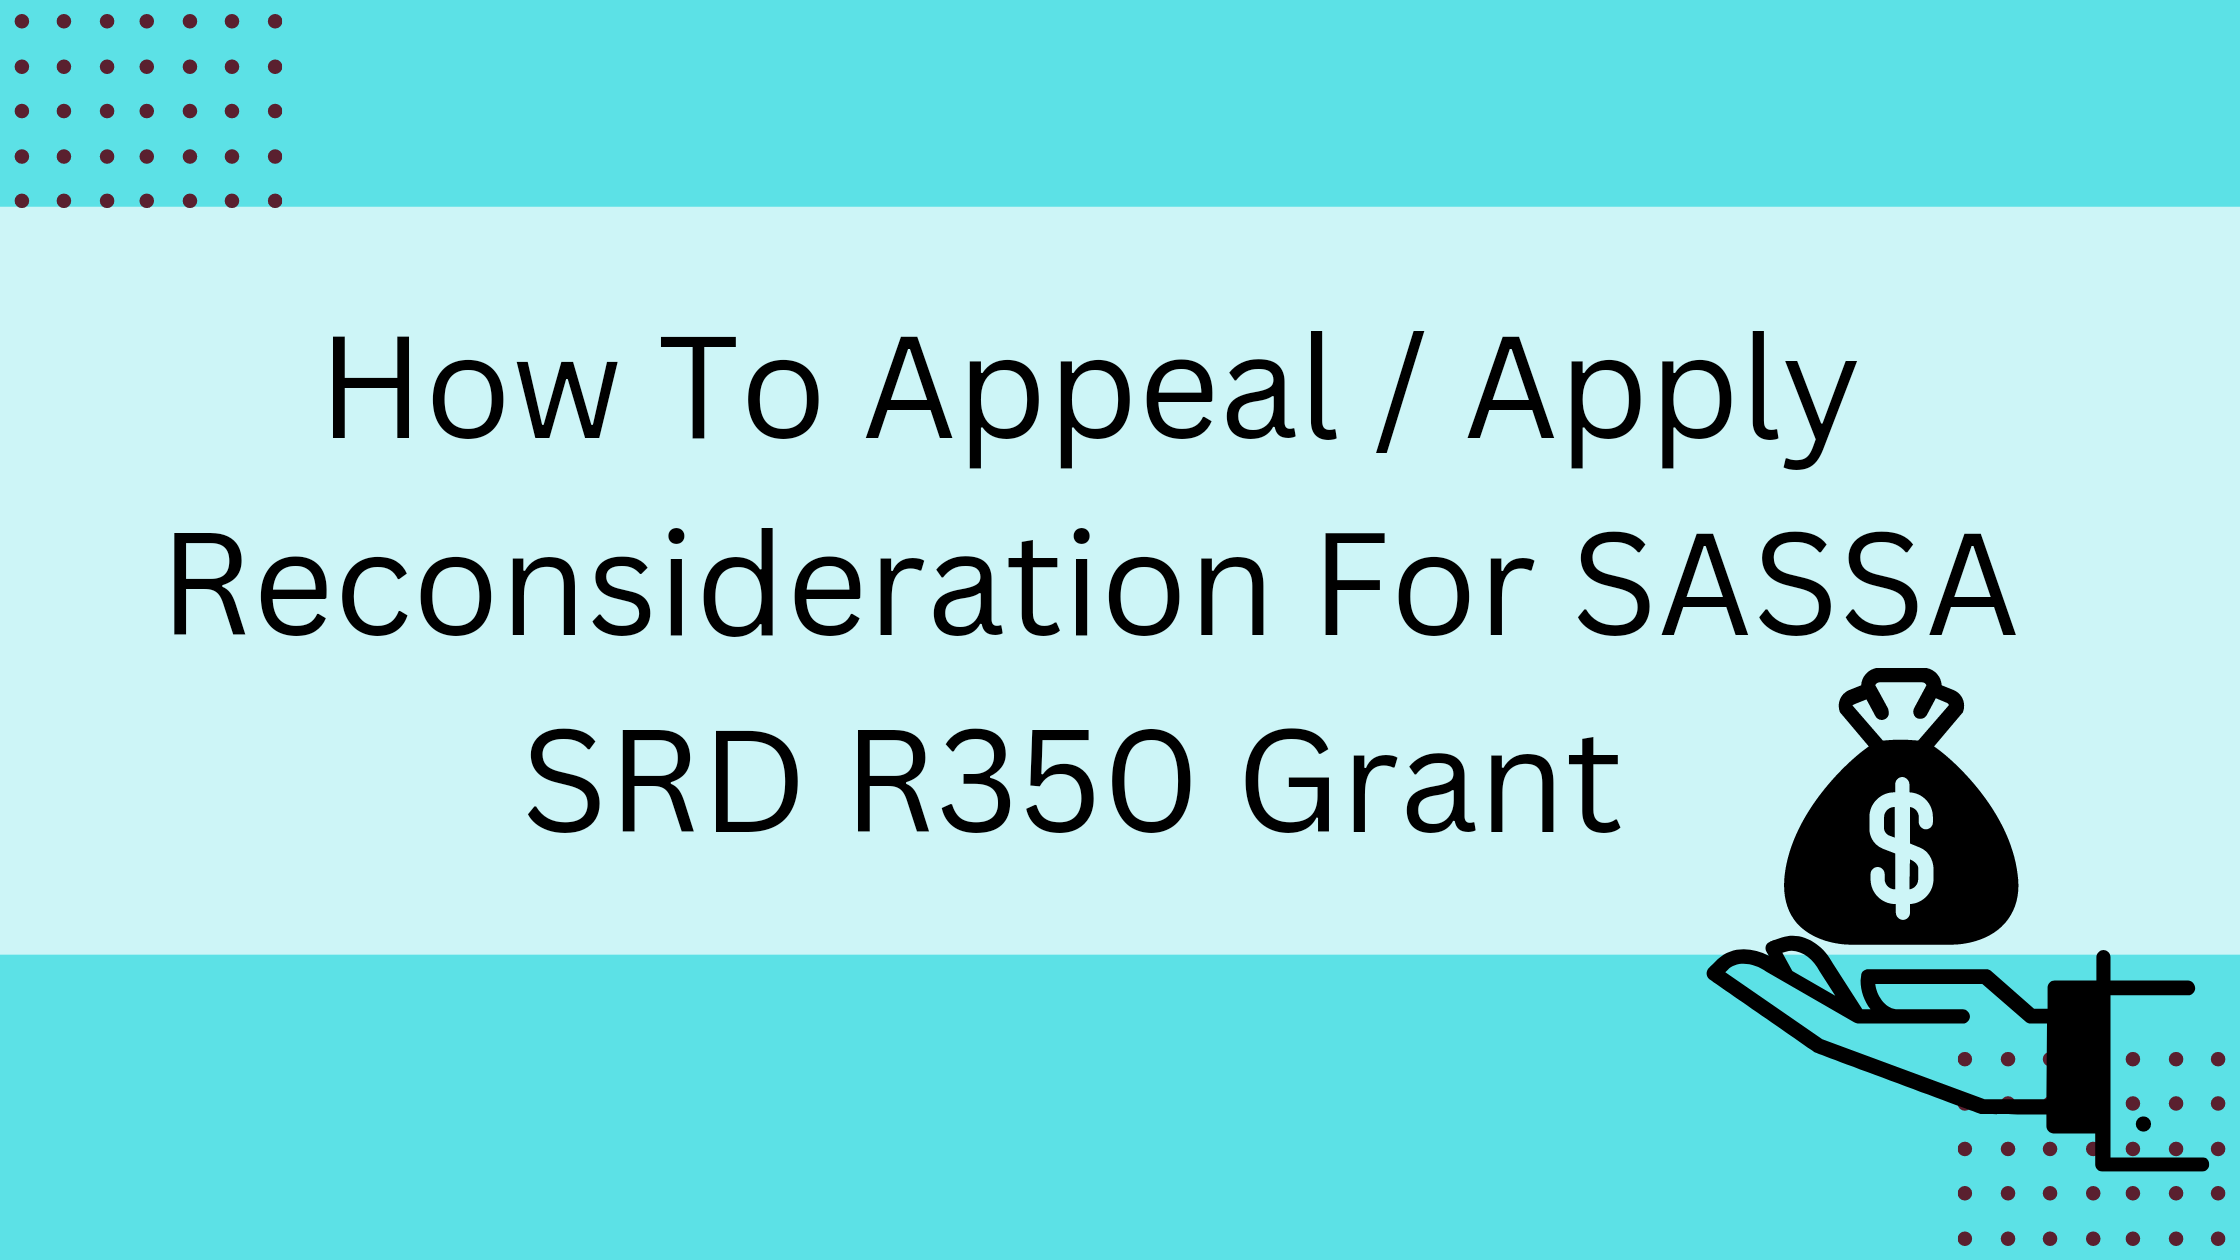 How To Appeal / Apply Reconsideration For SASSA SRD R350 Grant